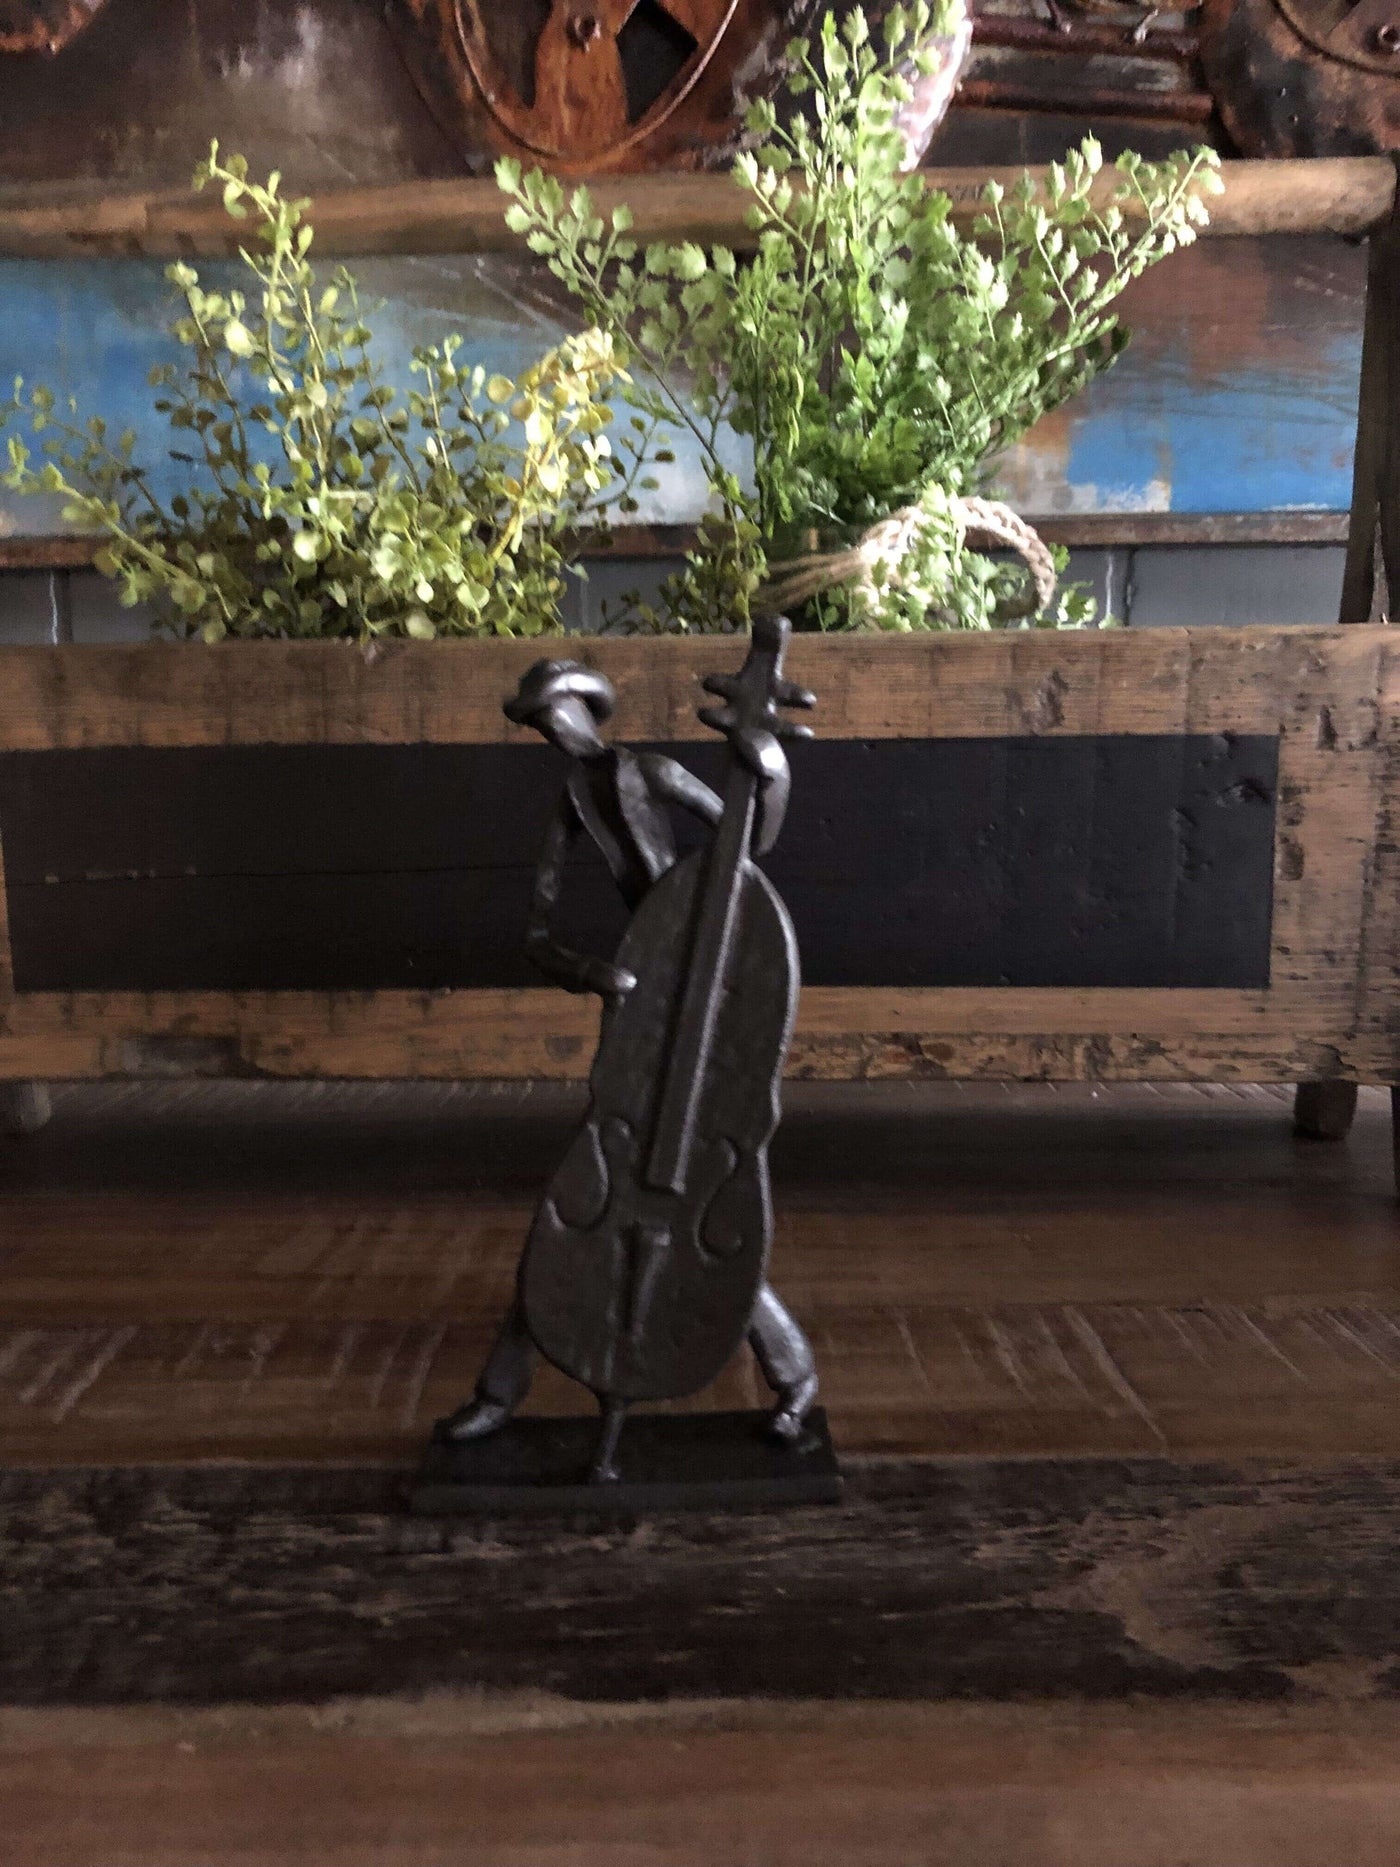 Jazz Cowboy Musician Playing Cello Sculpture Cast Iron in partnership with Rustic Deco Incorporated